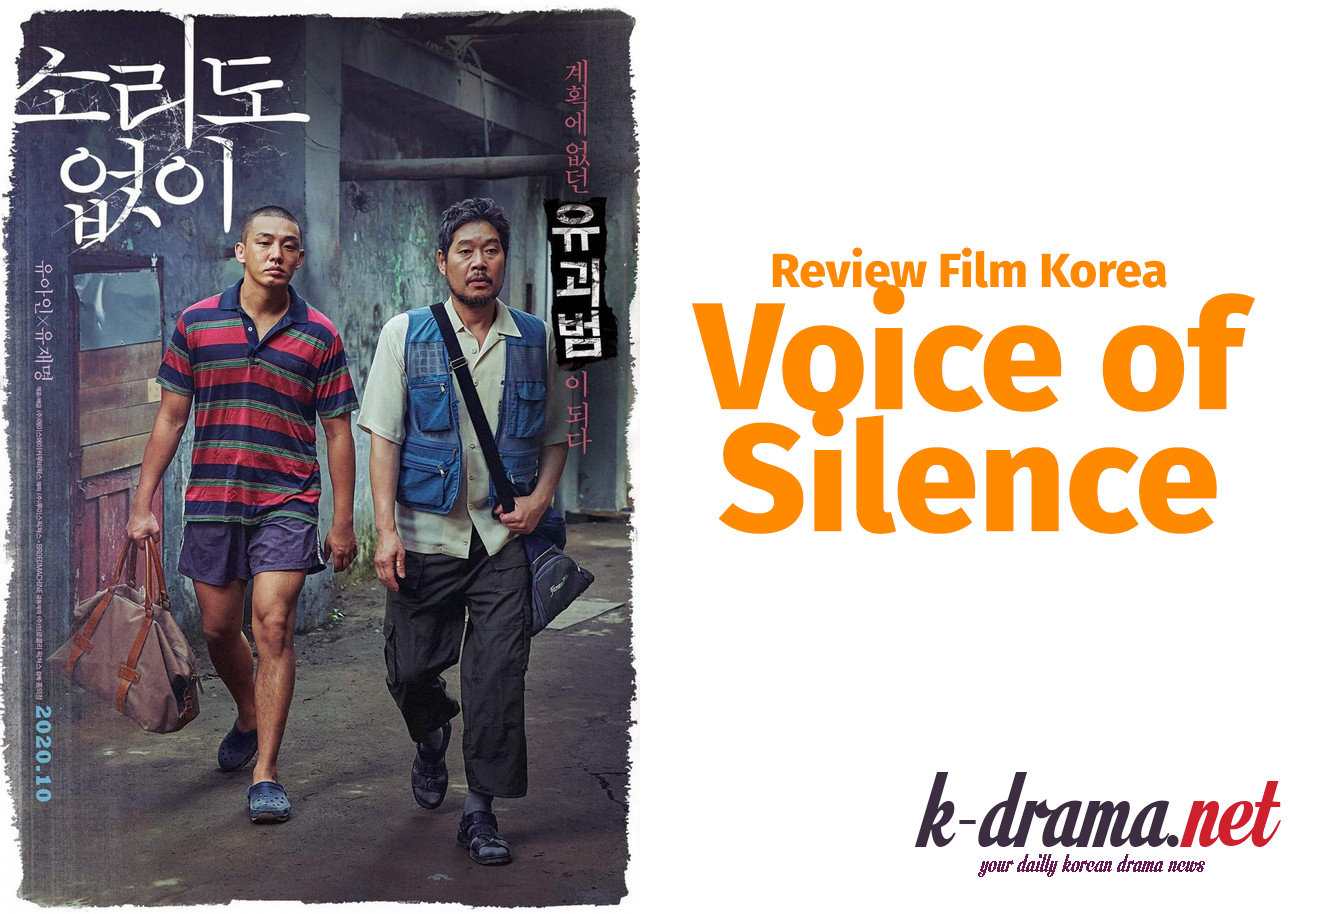 Sinopsis dan Review film voice of silence